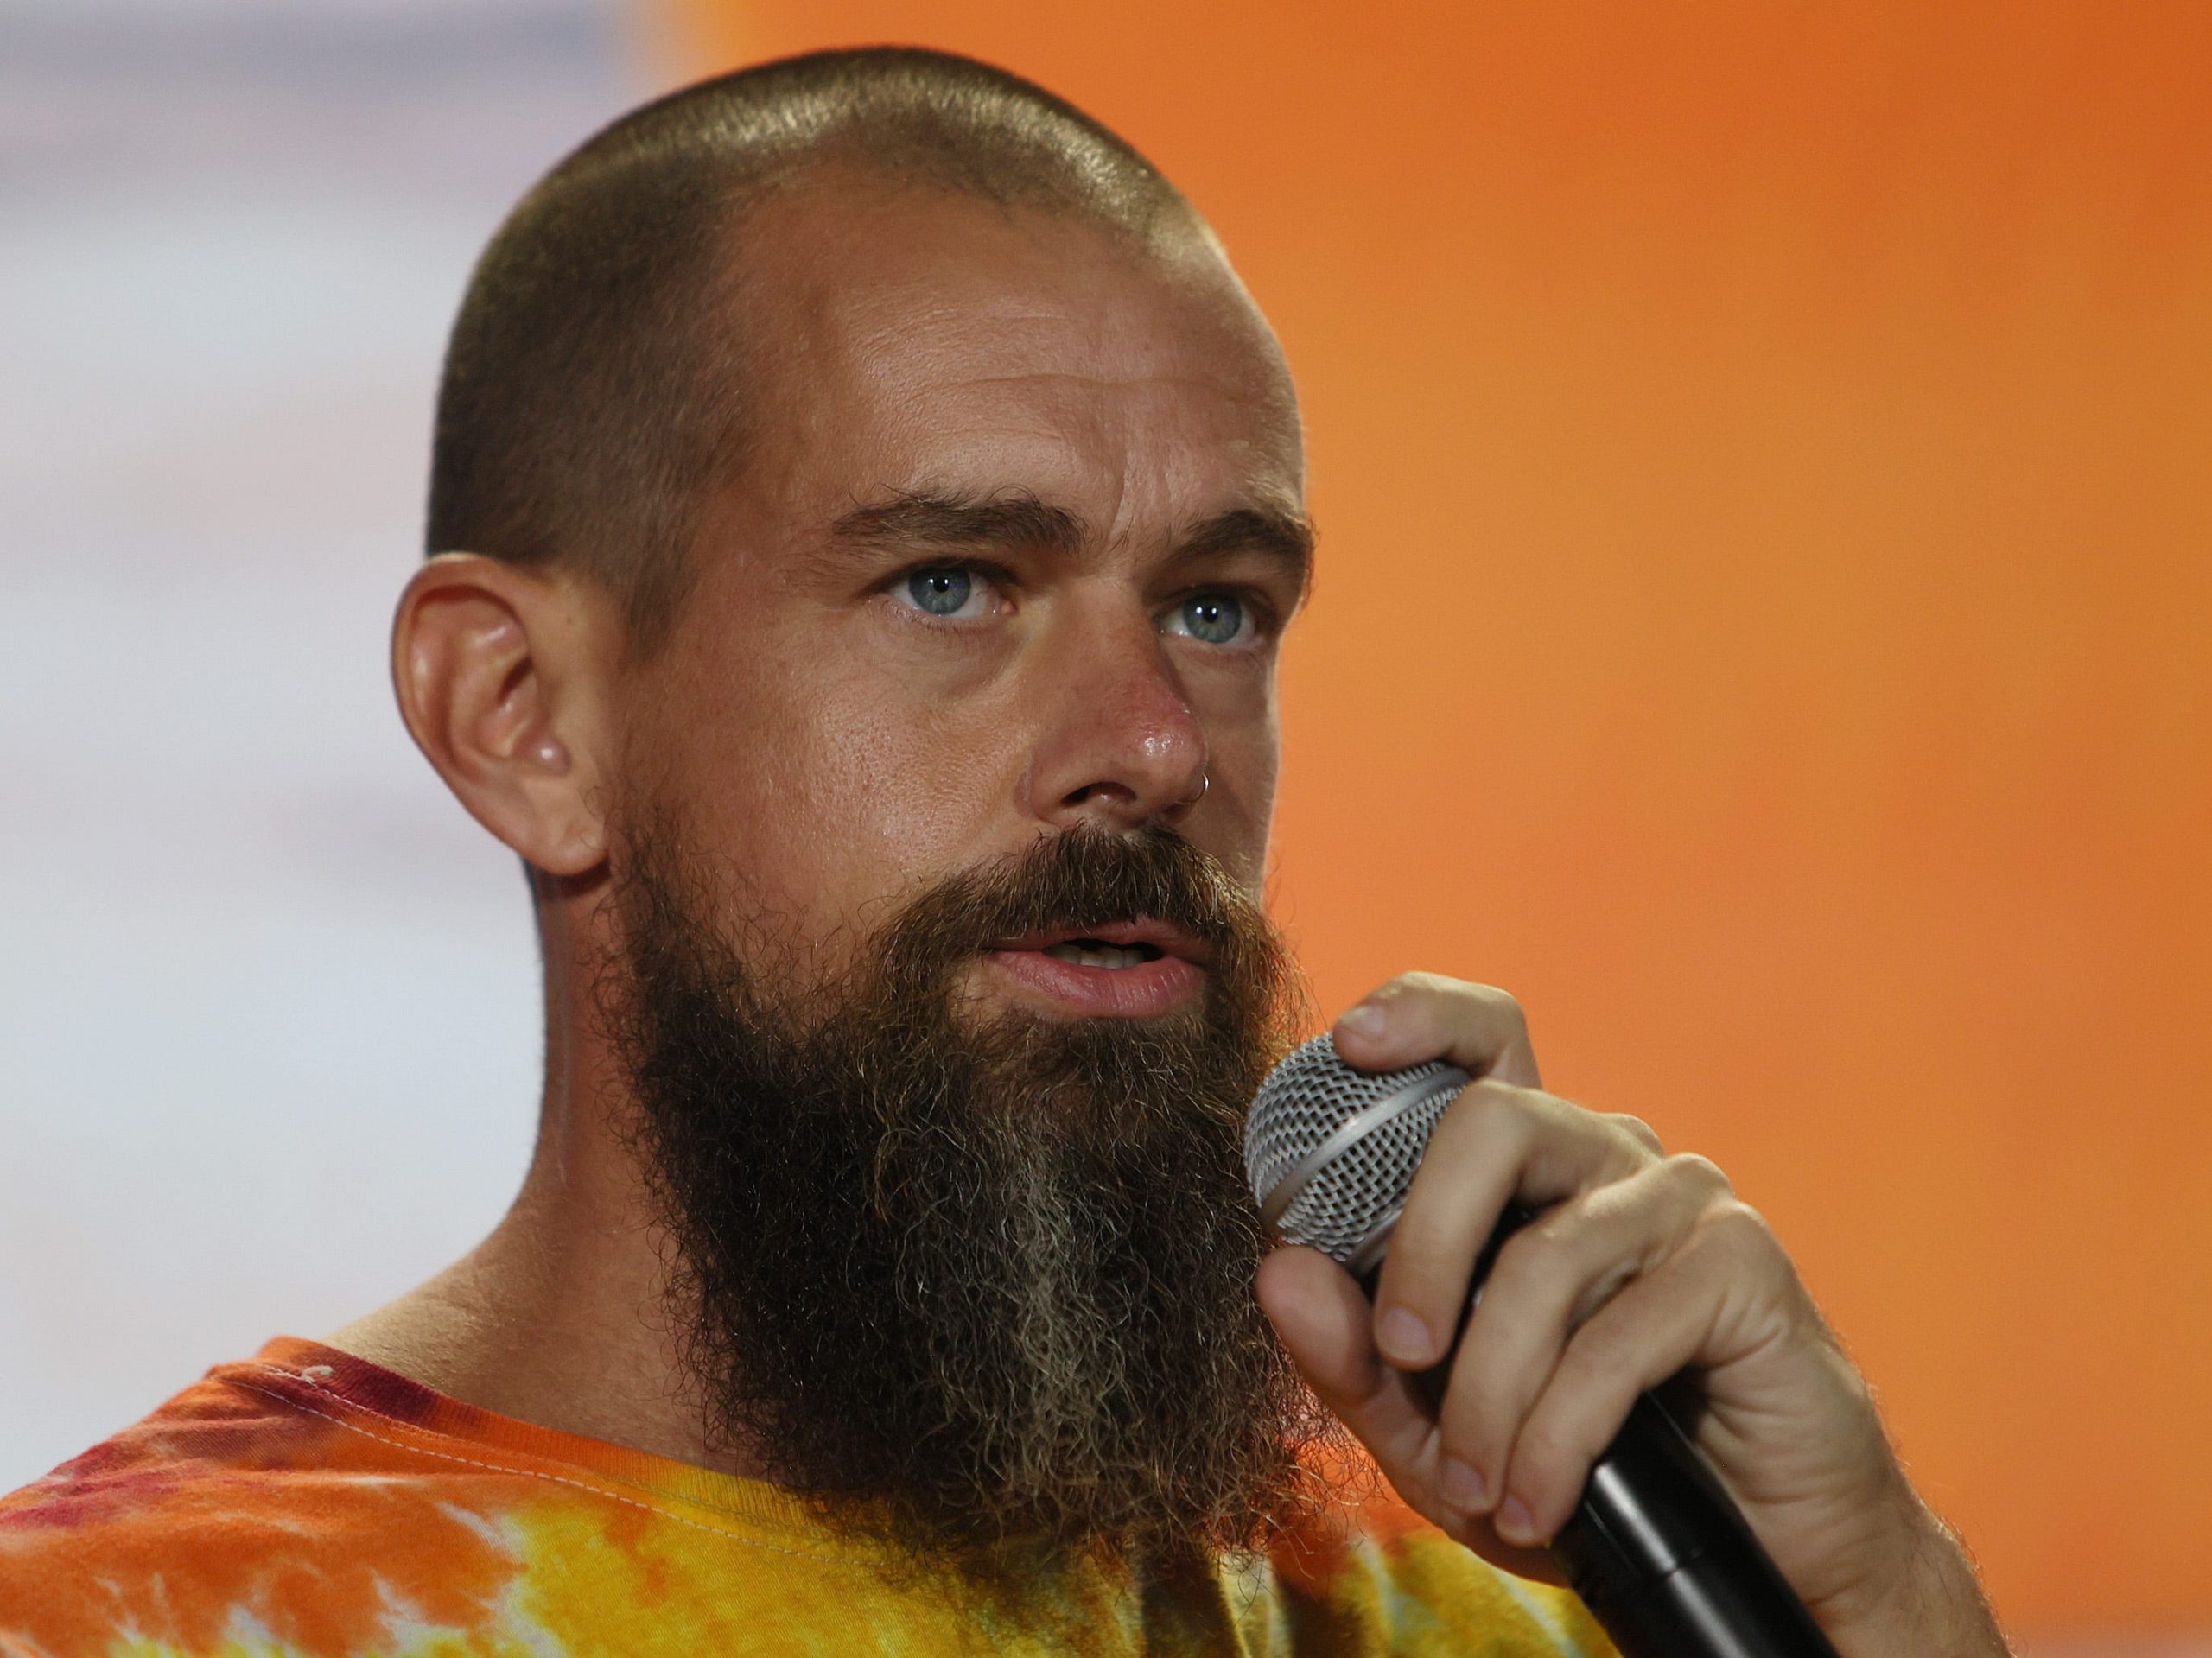 Jack Dorsey appears at a bitcoin convention on June 4, 2021 in Miami, Florida.